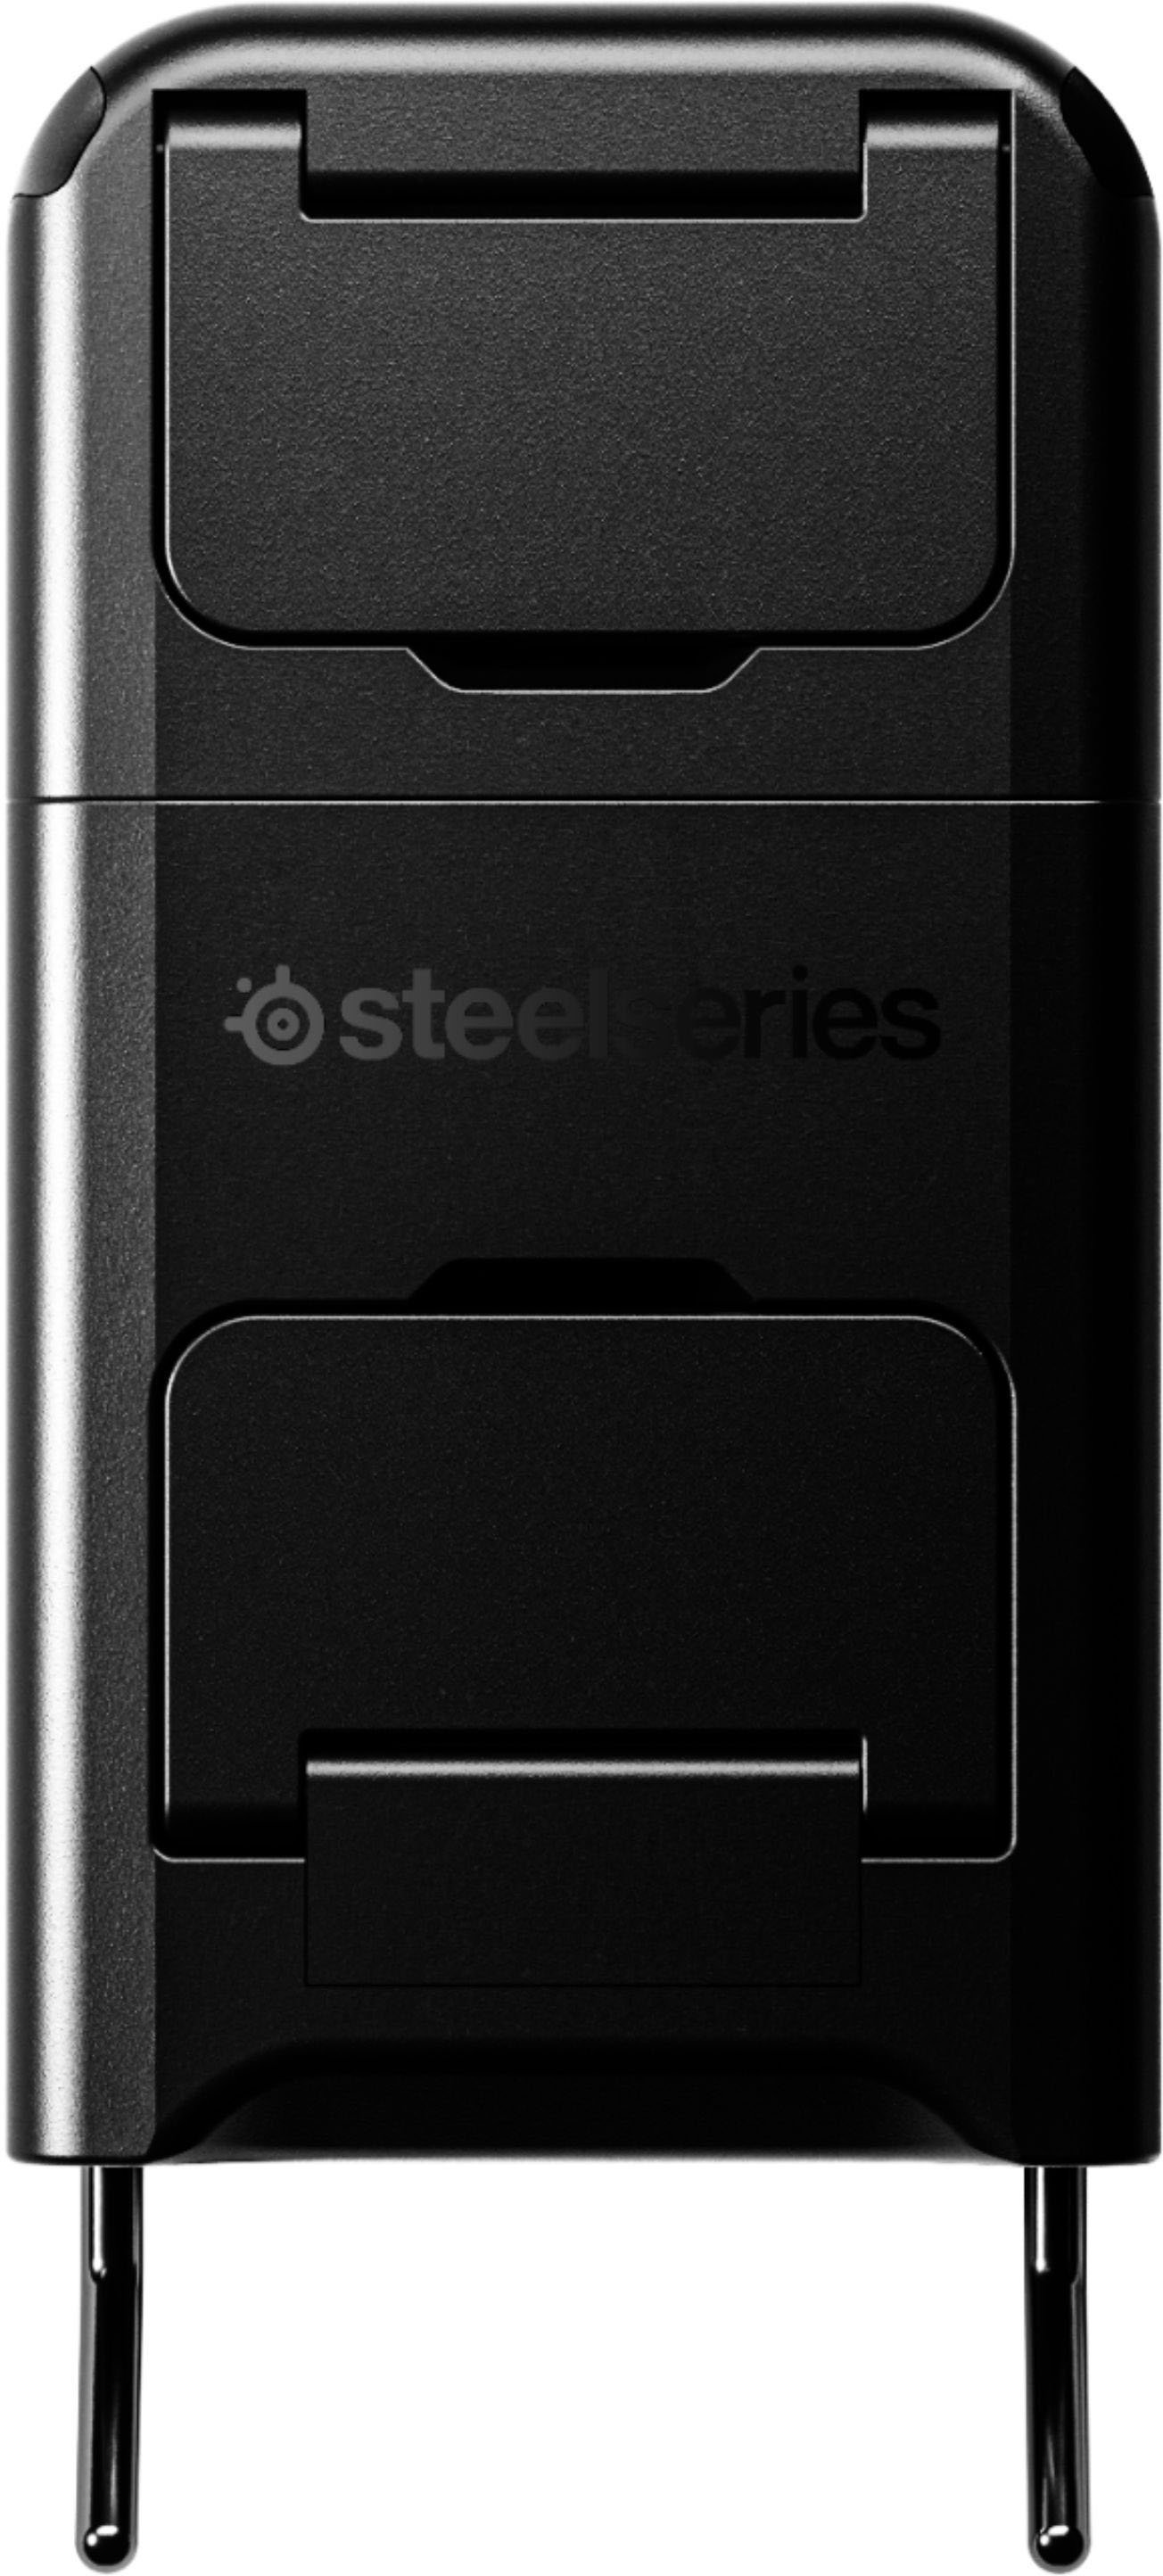 Back View: Sideclick - Universal Remote Attachment for Apple TV 2nd, 3rd, 4th, and 5th 4K Generation - Black